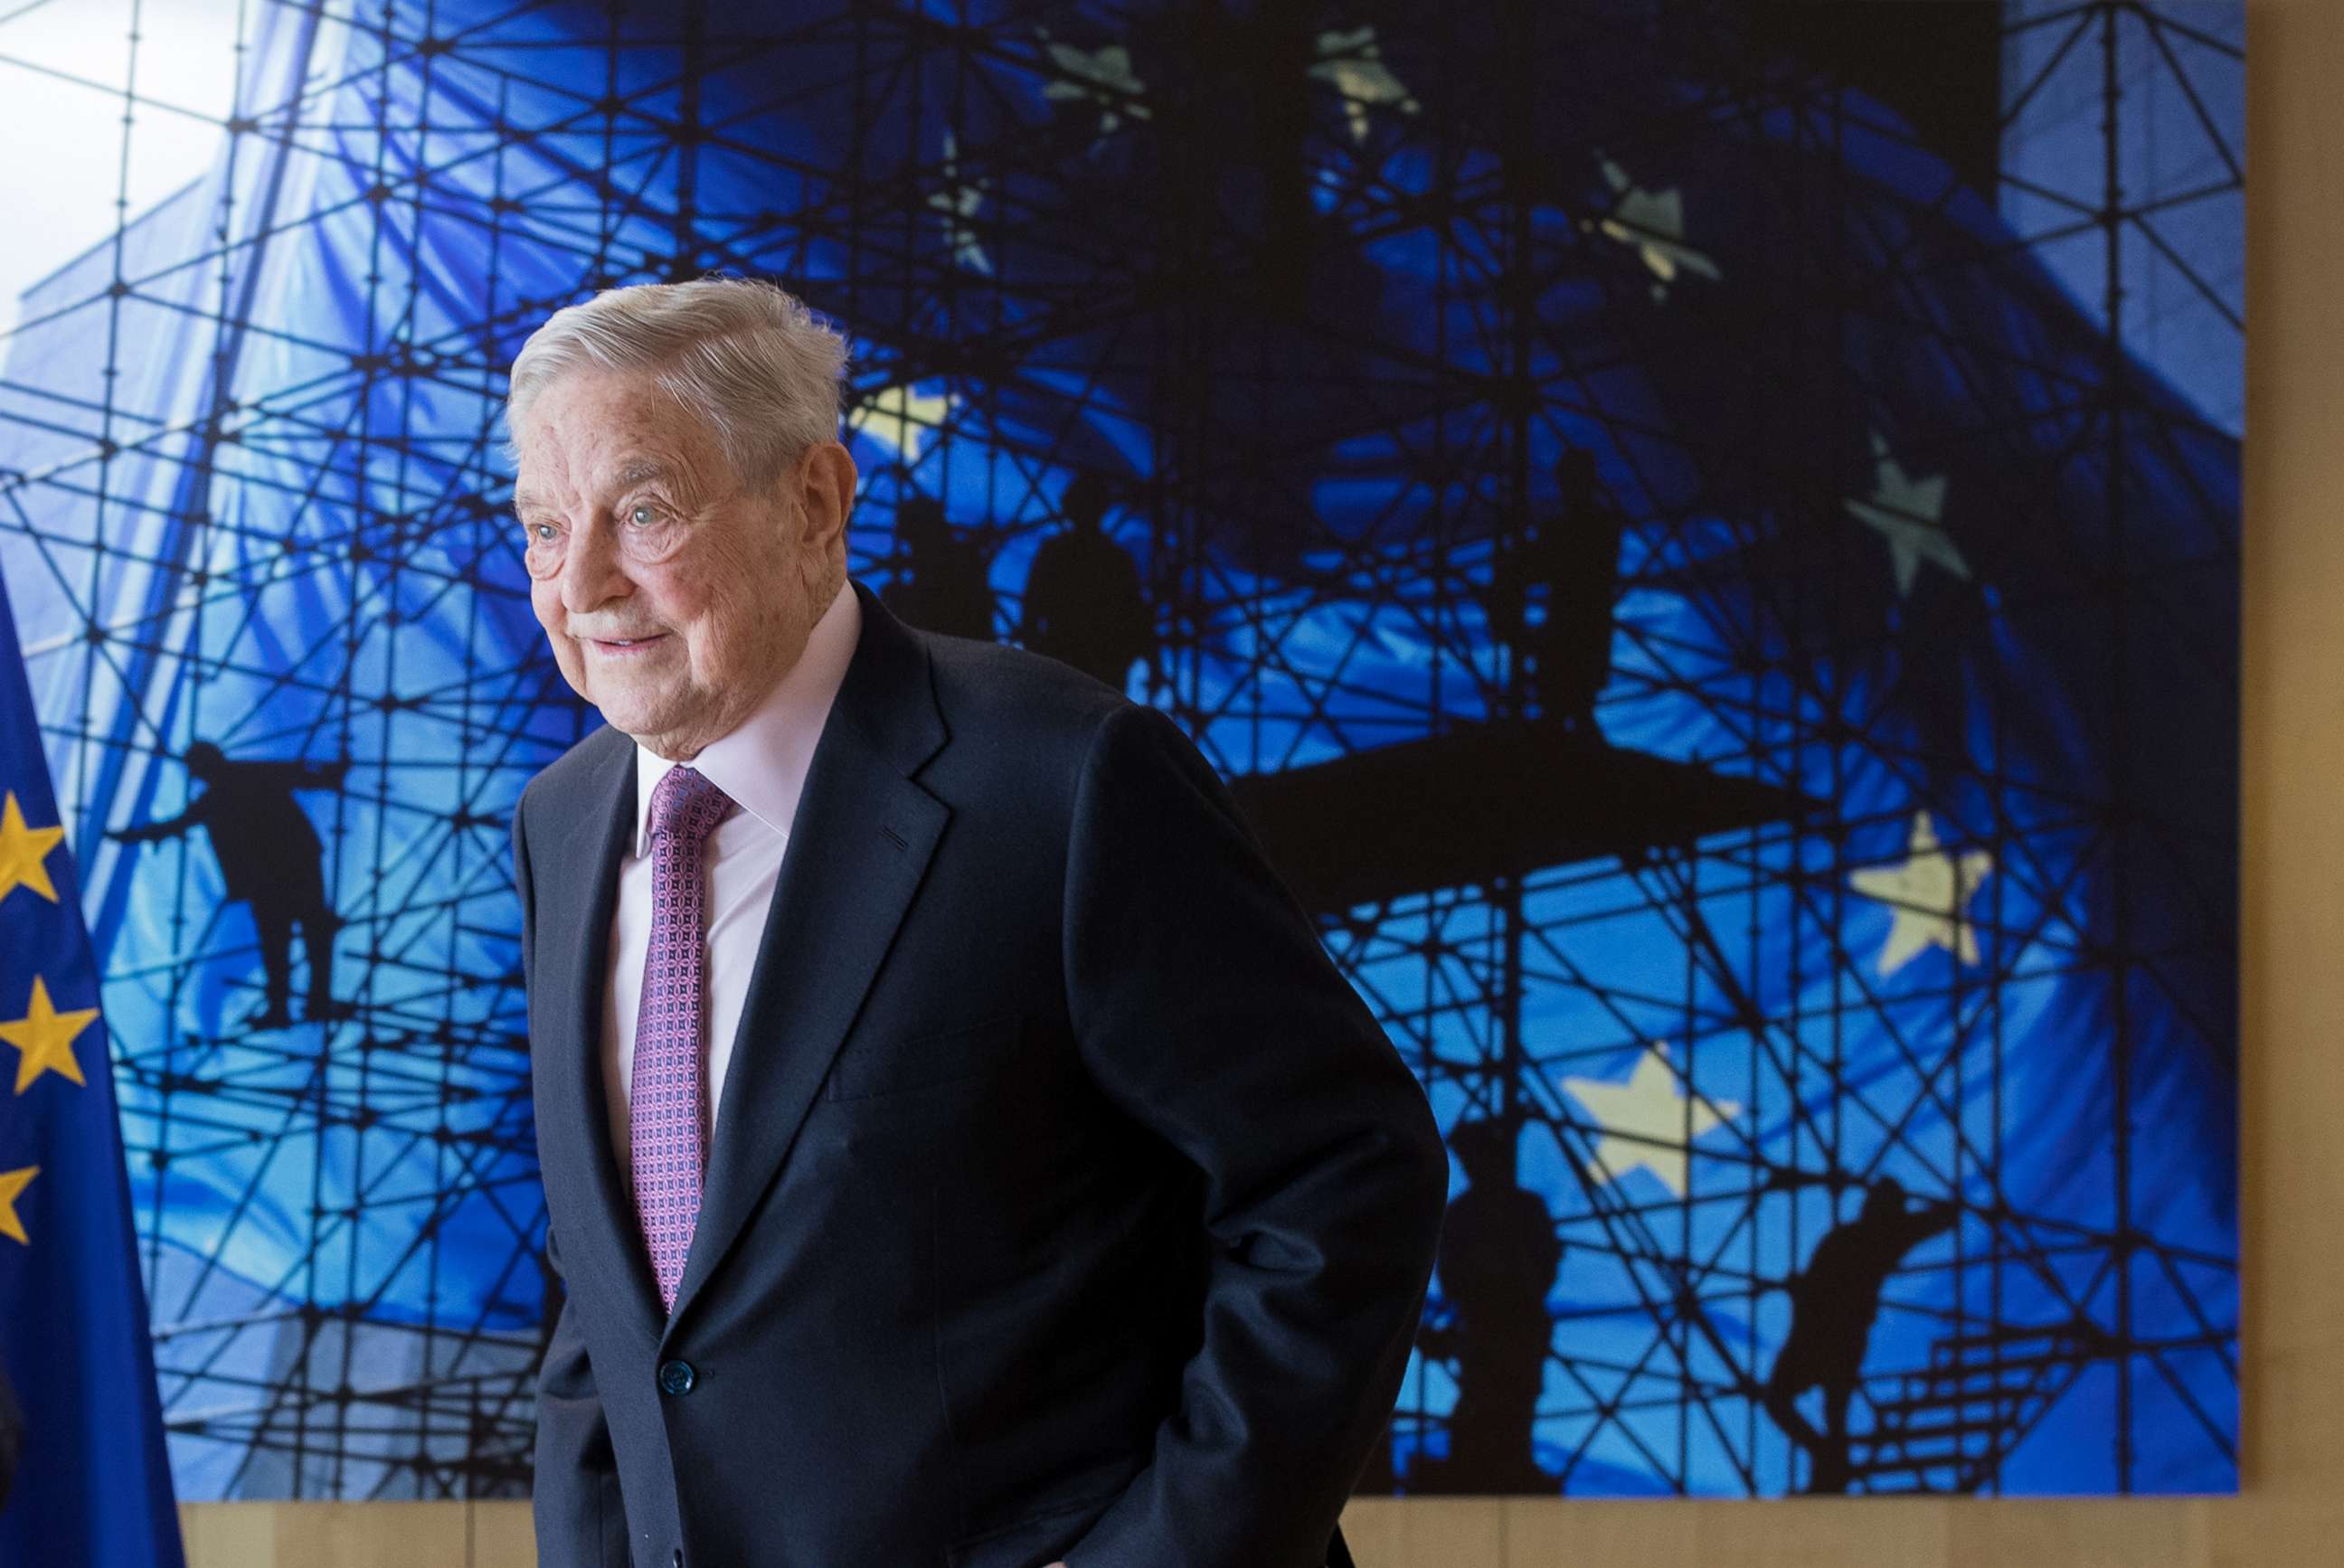 PHOTO: George Soros, billionaire and founder of Soros Fund Management LLC, poses for a photograph in Brussels, Belgium, April 27, 2017.